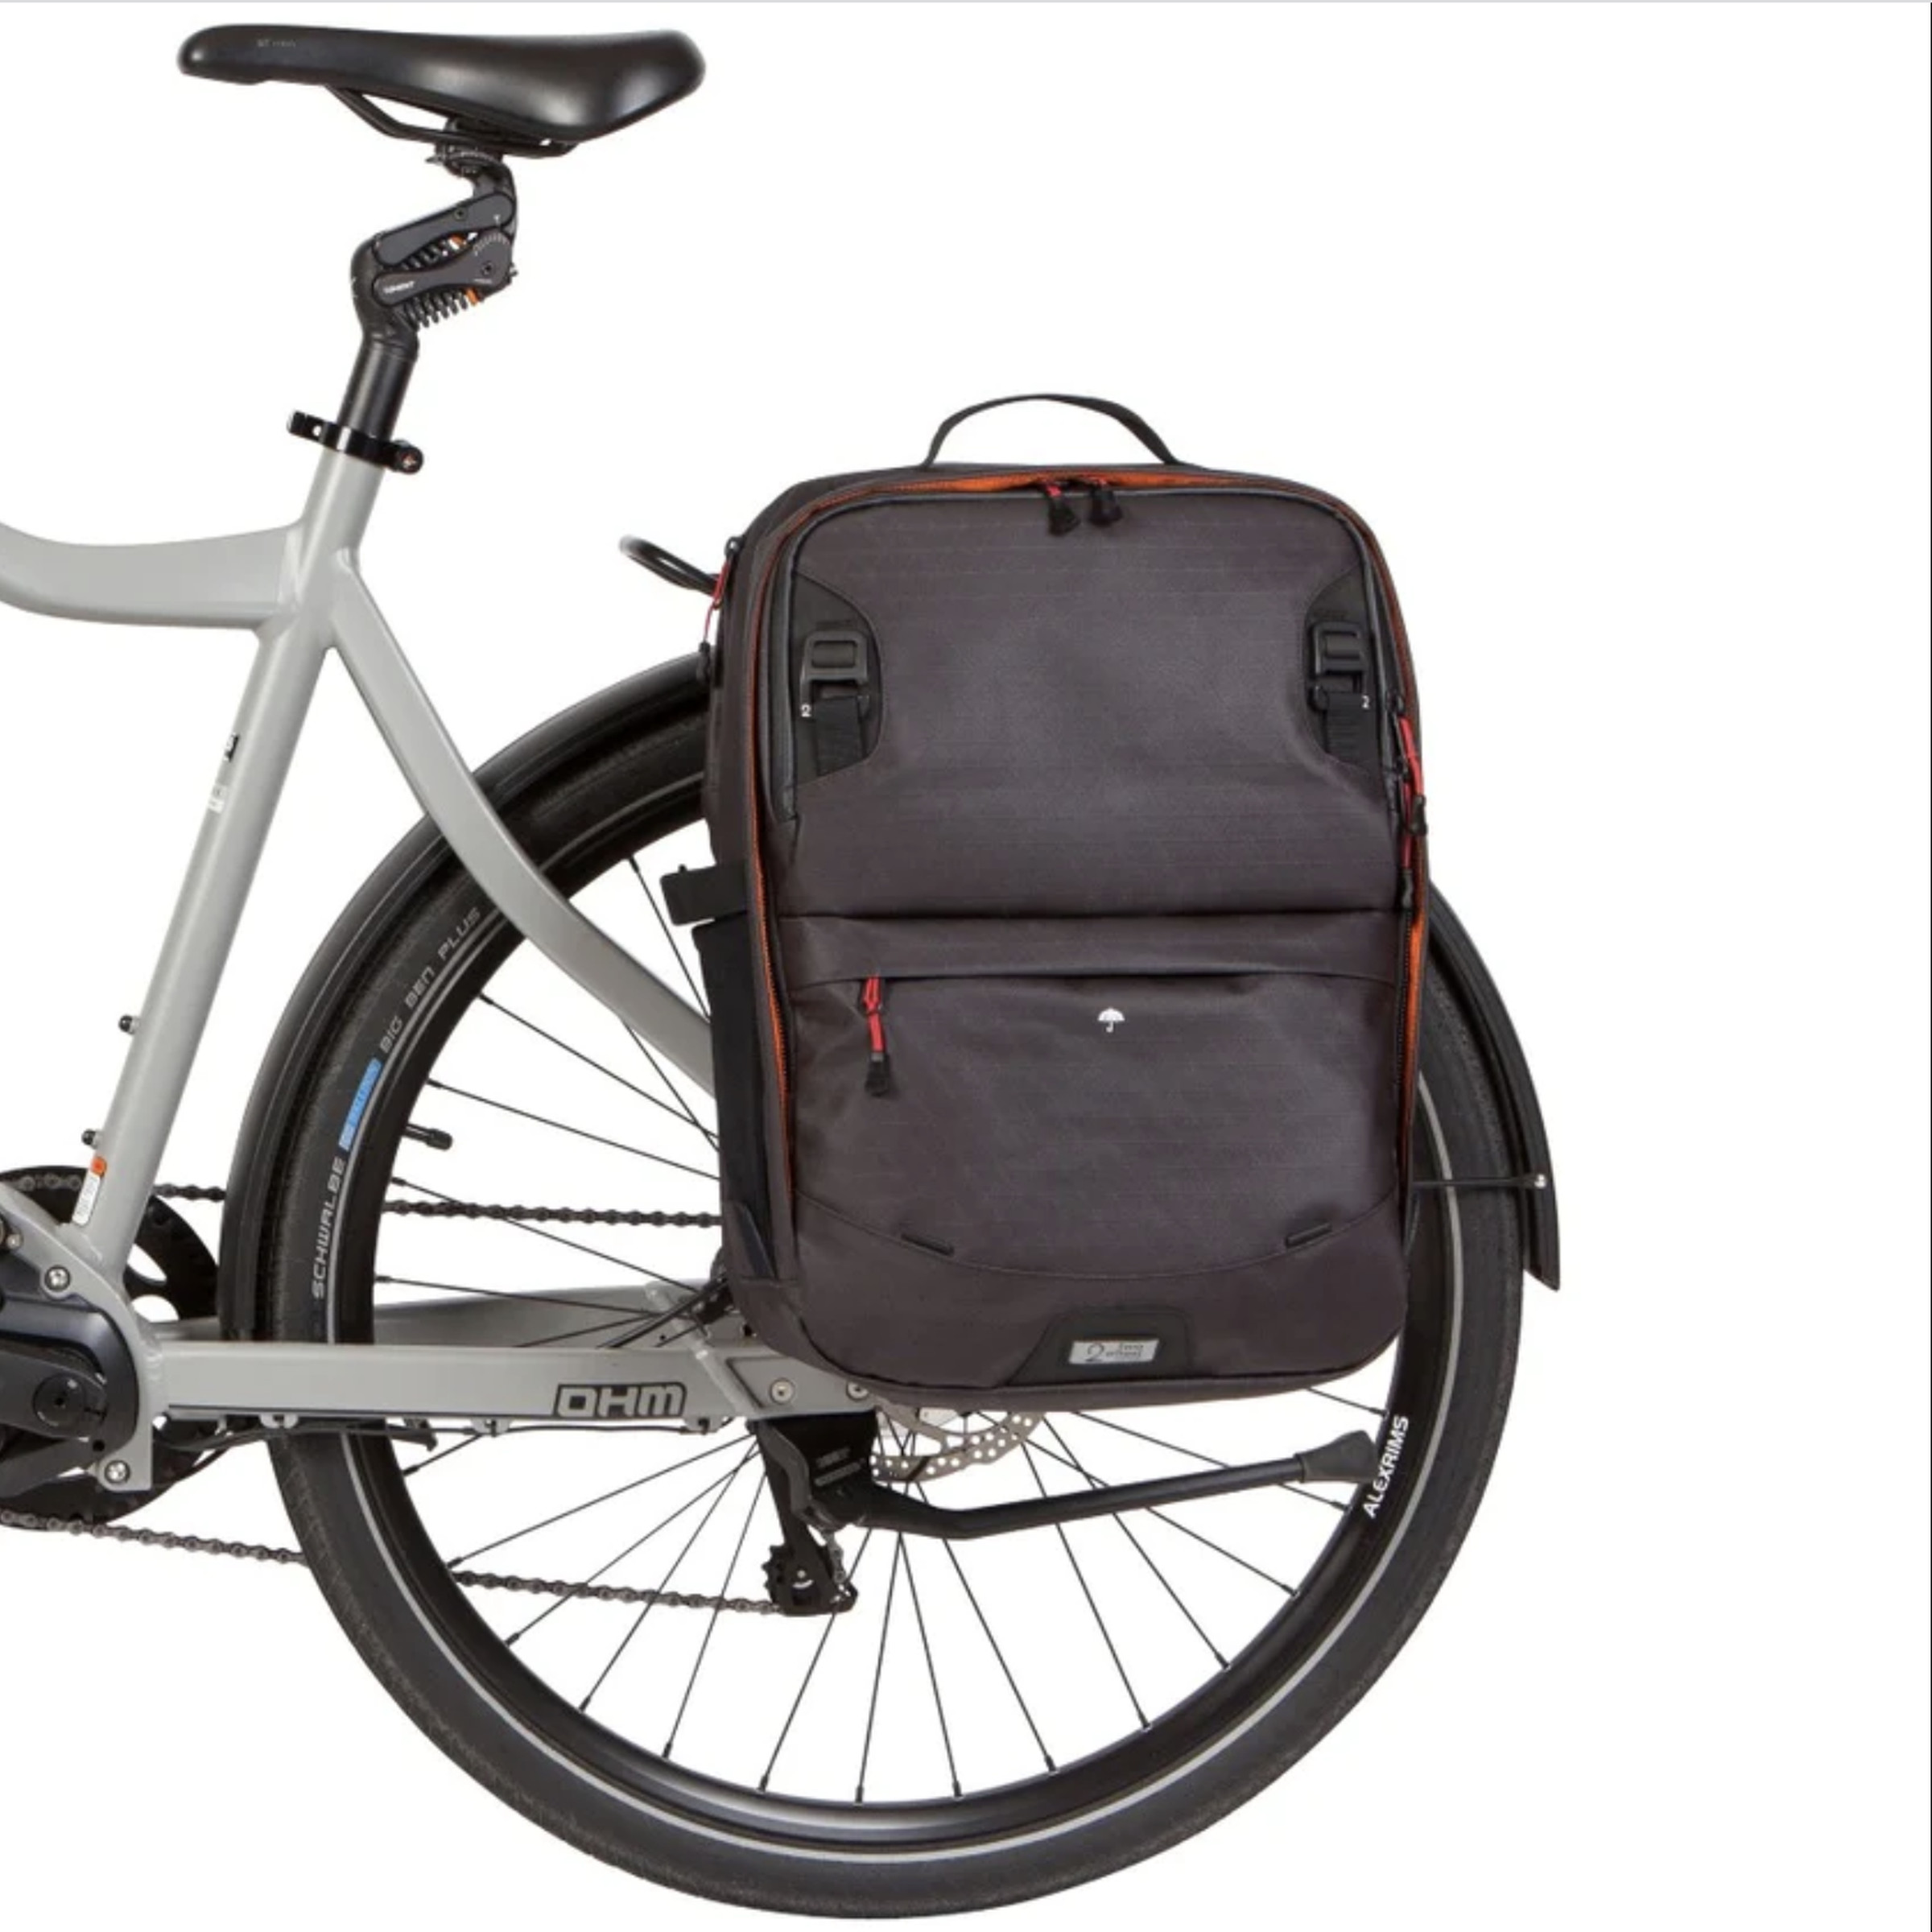 The back end of a bicycle with a backpack attached above the rear wheel.